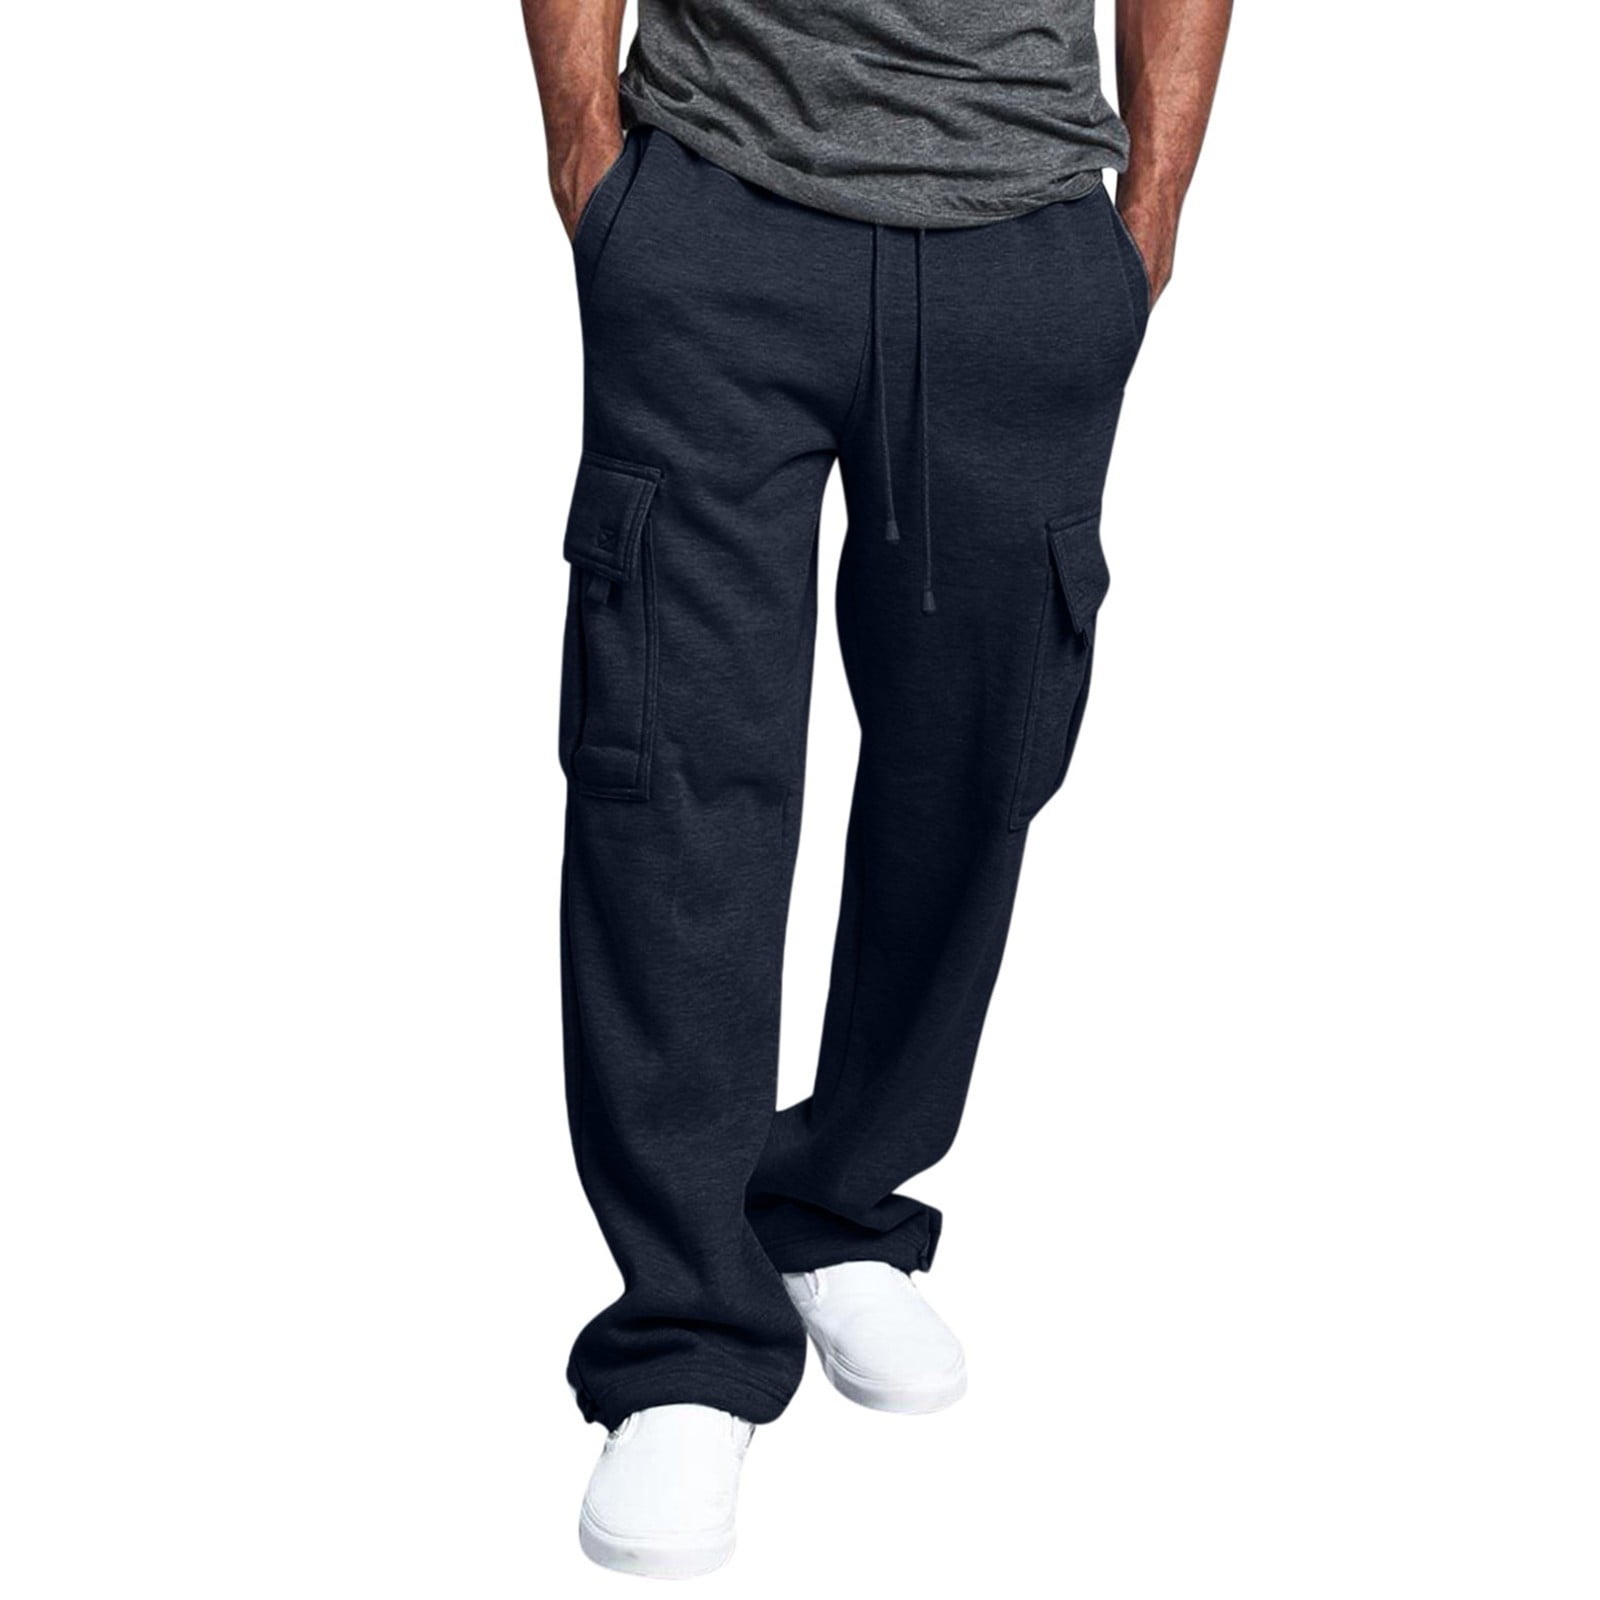 B91xZ Mens Jogger Pant Open Bottom Joggers Casual Baggy Sweatpants with ...